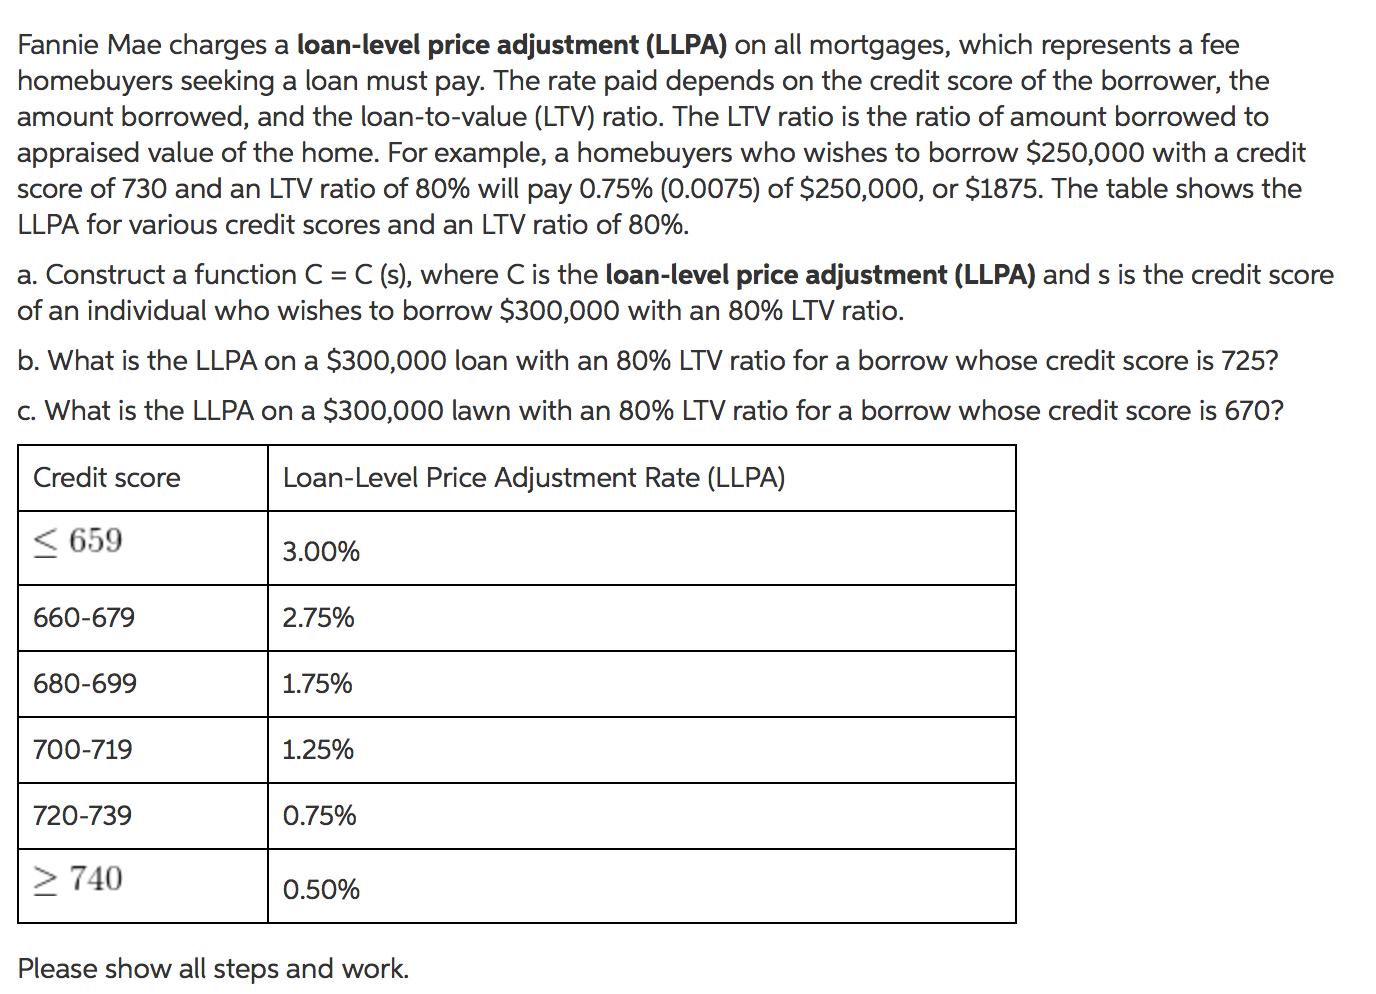 Fannie Mae charges a loan-level price adjustment (LLPA) on all mortgages, which represents a fee homebuyers seeking a loan mu